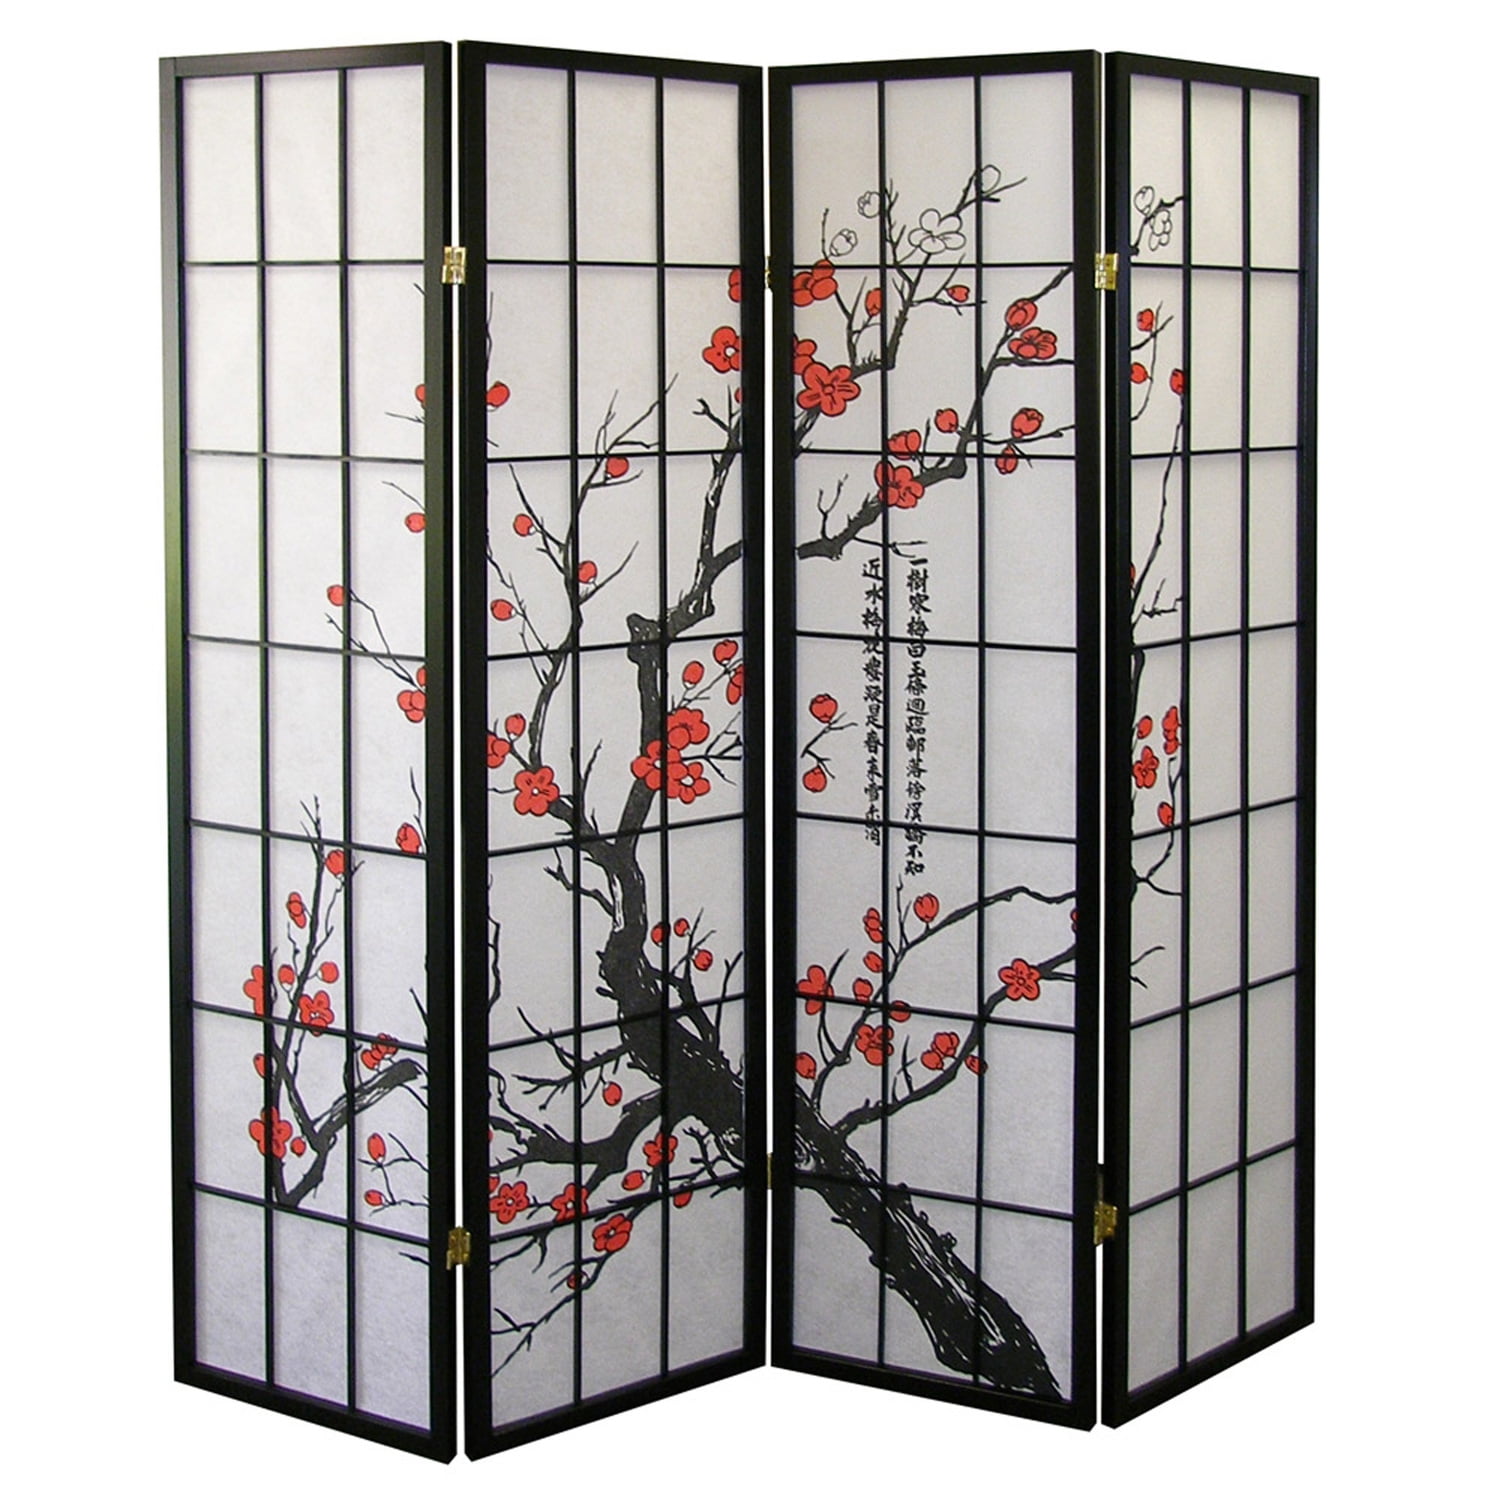 6-Panel Peacock Screen Room Divider Wood Folding Partition Commemorative Gift 